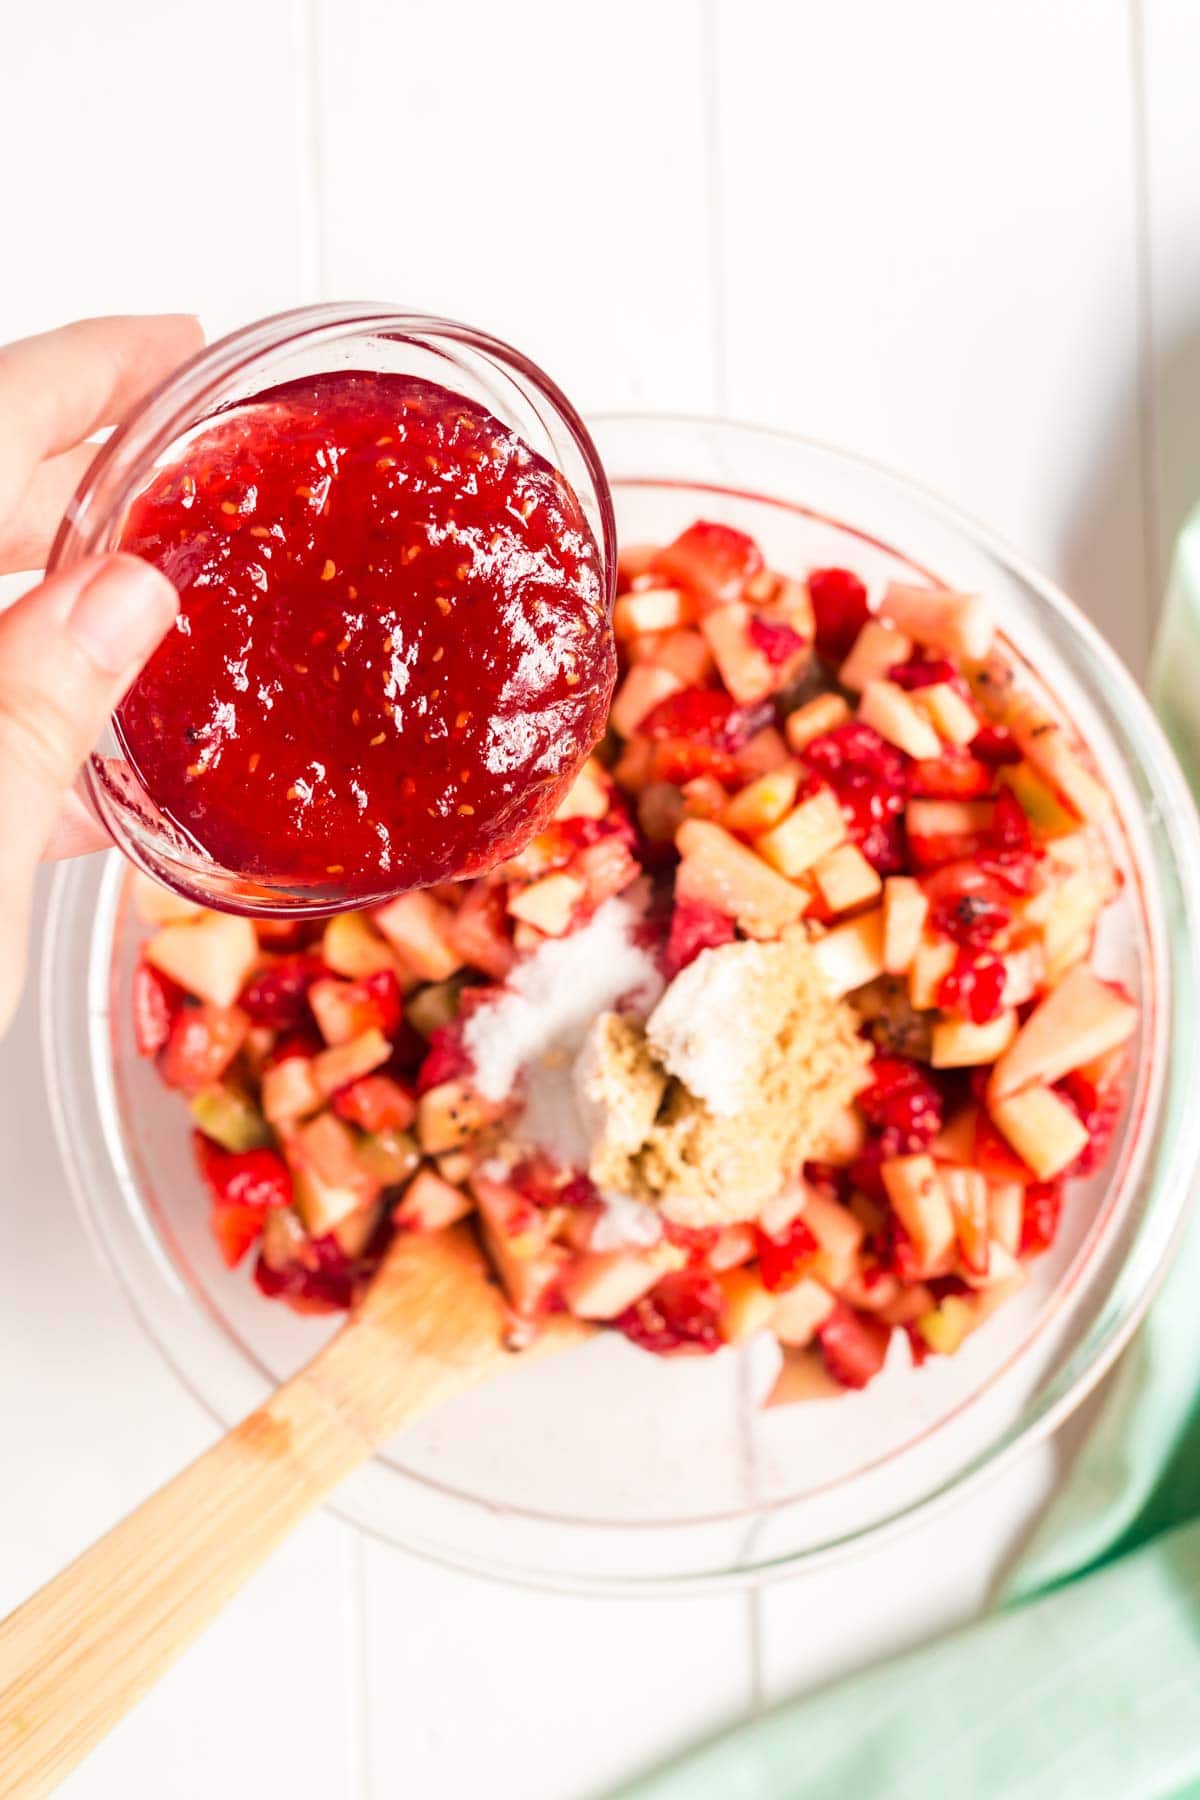 Hand holding a glass bowl of jam over top of a bowl of fruit salsa